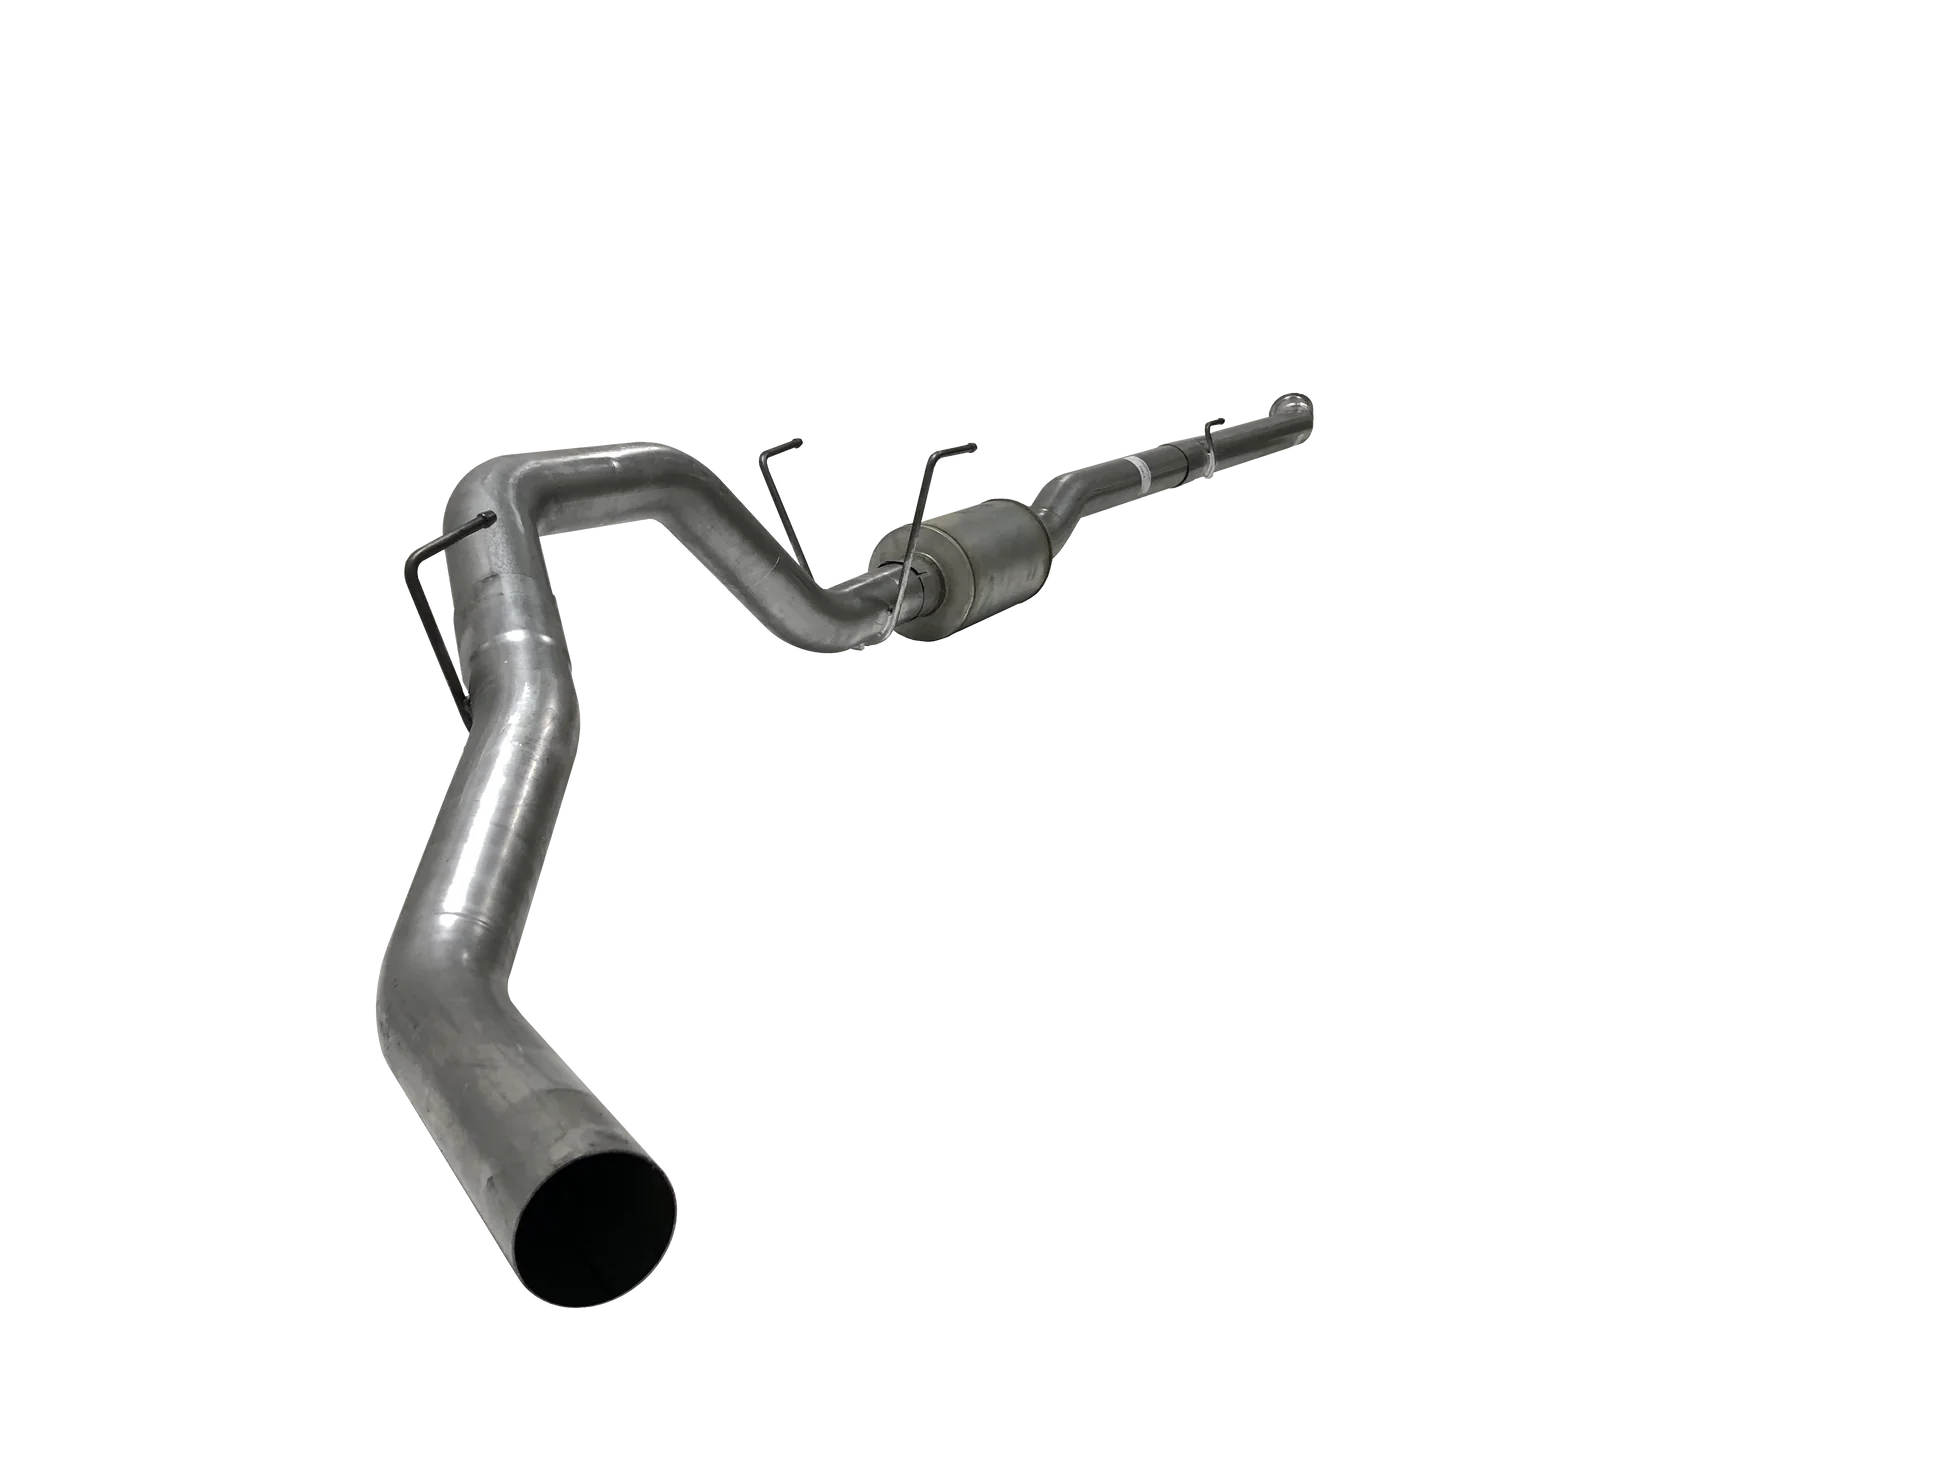 411028 411029 412028 412029 Mel's Manufacturing 4" Flex Pipe Back Single | 2019+ Ram 2500/3500 6.7L Cummins  Mels Mfg FloPro Flo-Pro Flo Pro Hell On Wheels Performance Ltd Limited Canadian Owned and Operated Online Diesel Parts Distribution & Wholesale Supply Center in Alberta Canada Shipping Supplying to Alberta British Columbia Sask Saskatchewan Manitoba Ontario Quebec Newfoundland Labrador New Brunswick Nova Scotia Prince Edward Island AB BC SK MB ON QC PQ NS NB NFLD N.L. PEI